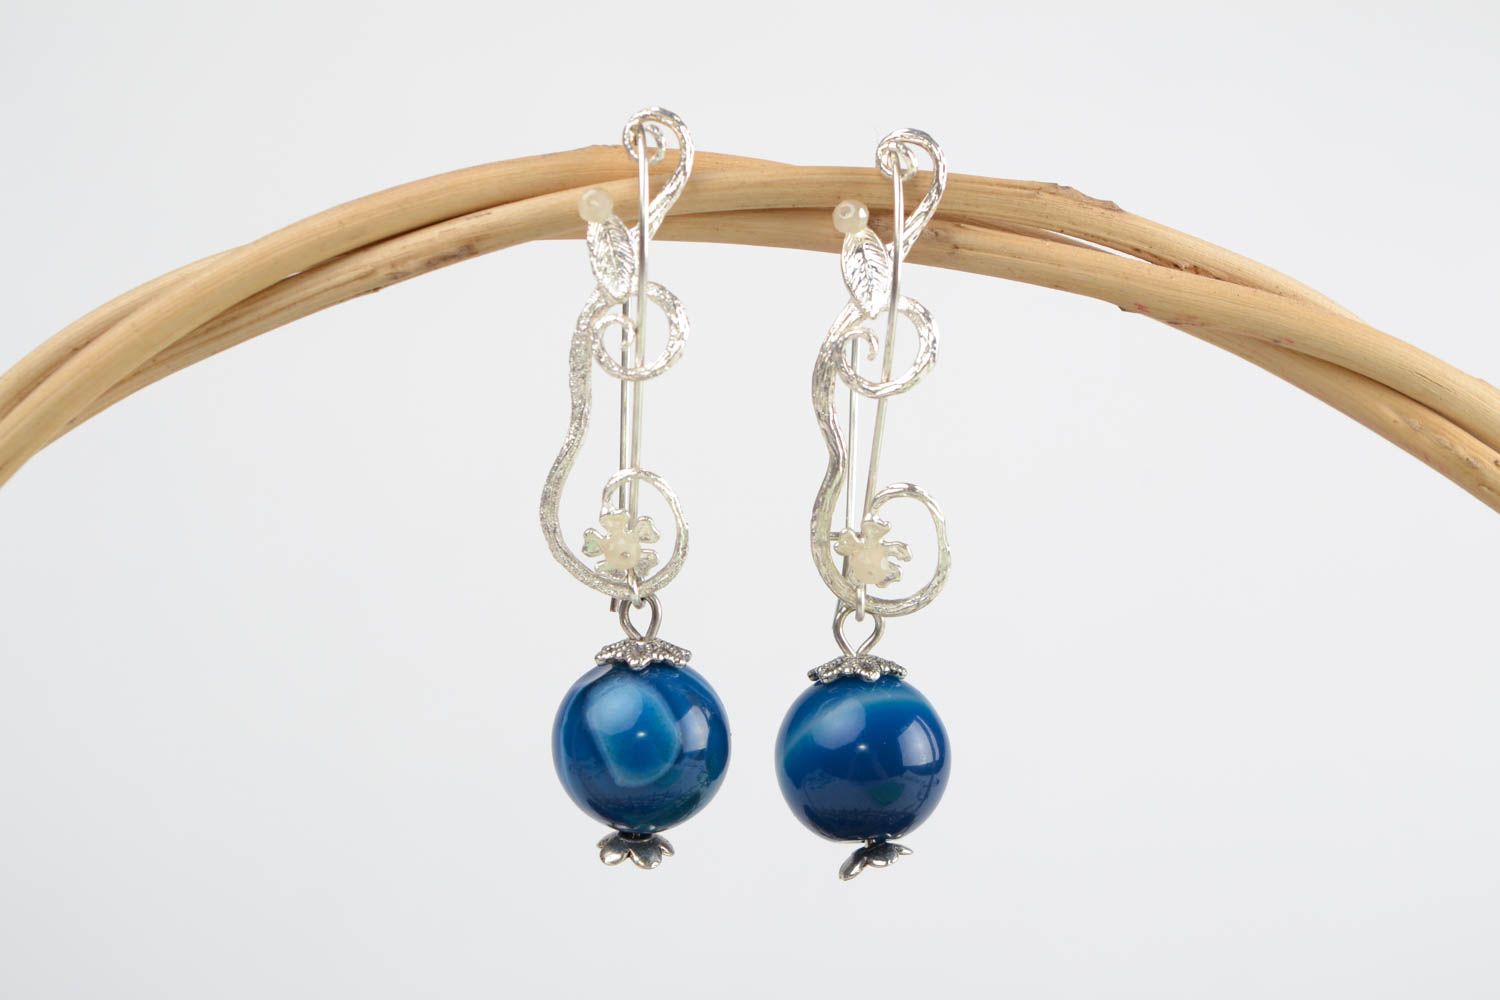 Handmade dangling earrings with silver colored fittings and blue agate beads photo 1